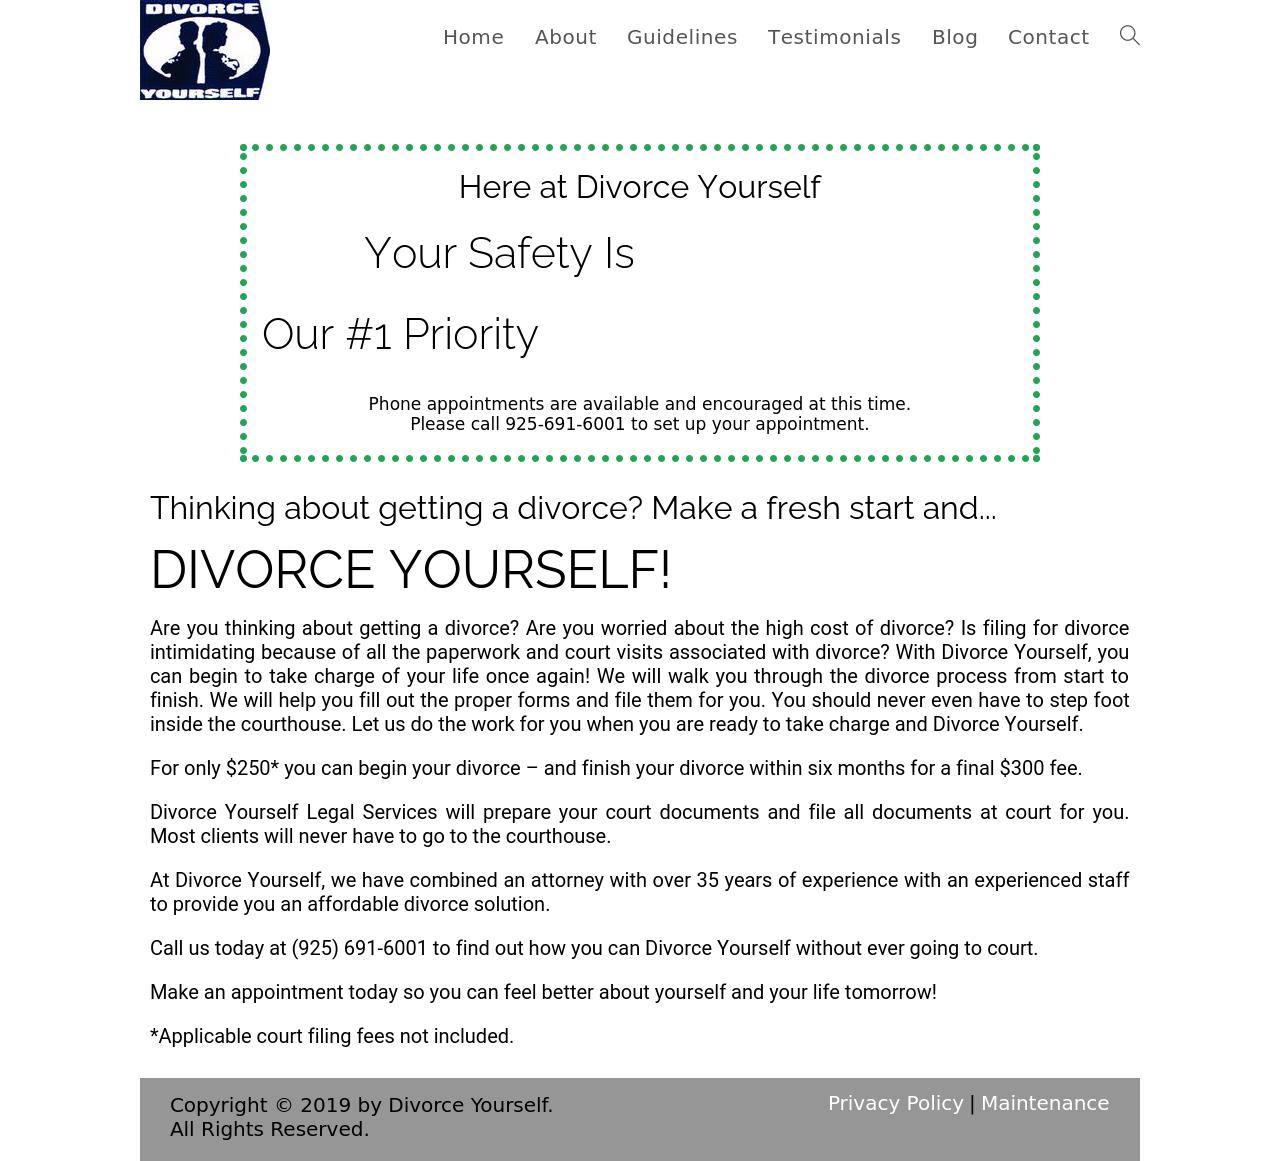 Divorce Yourself - Concord CA Lawyers